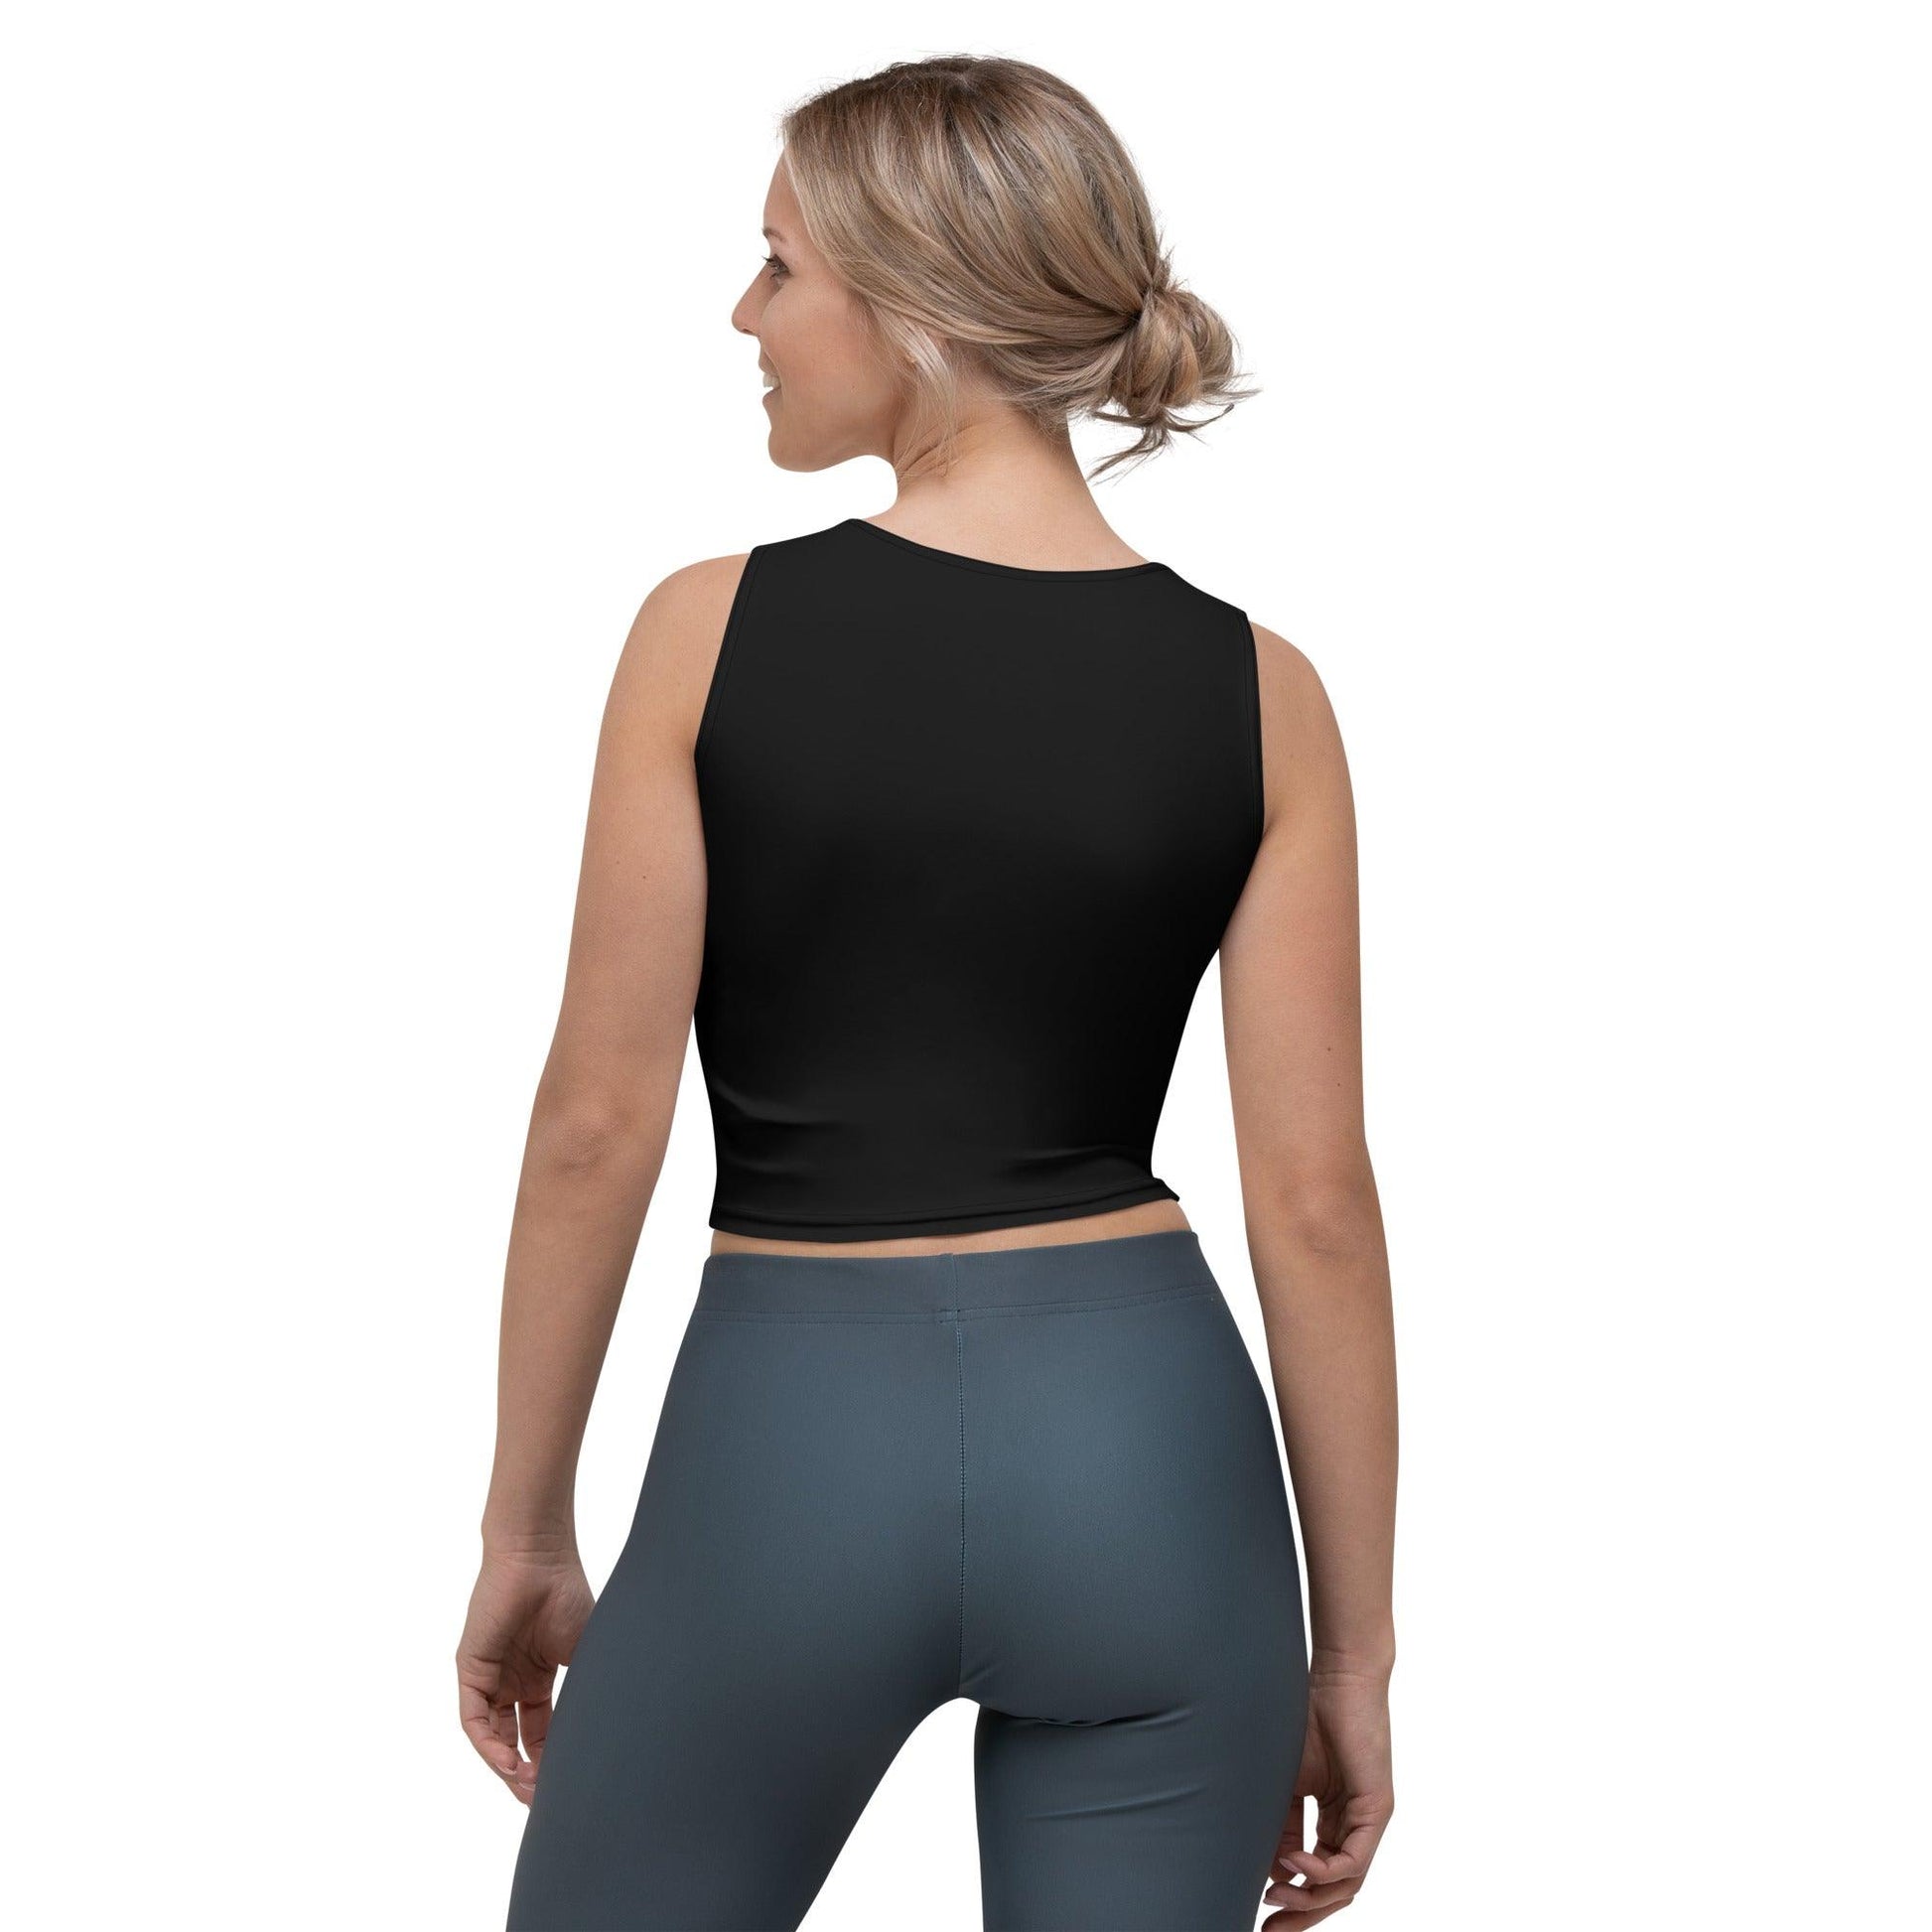 iSAW Womens Black Crop Top - iSAW Company